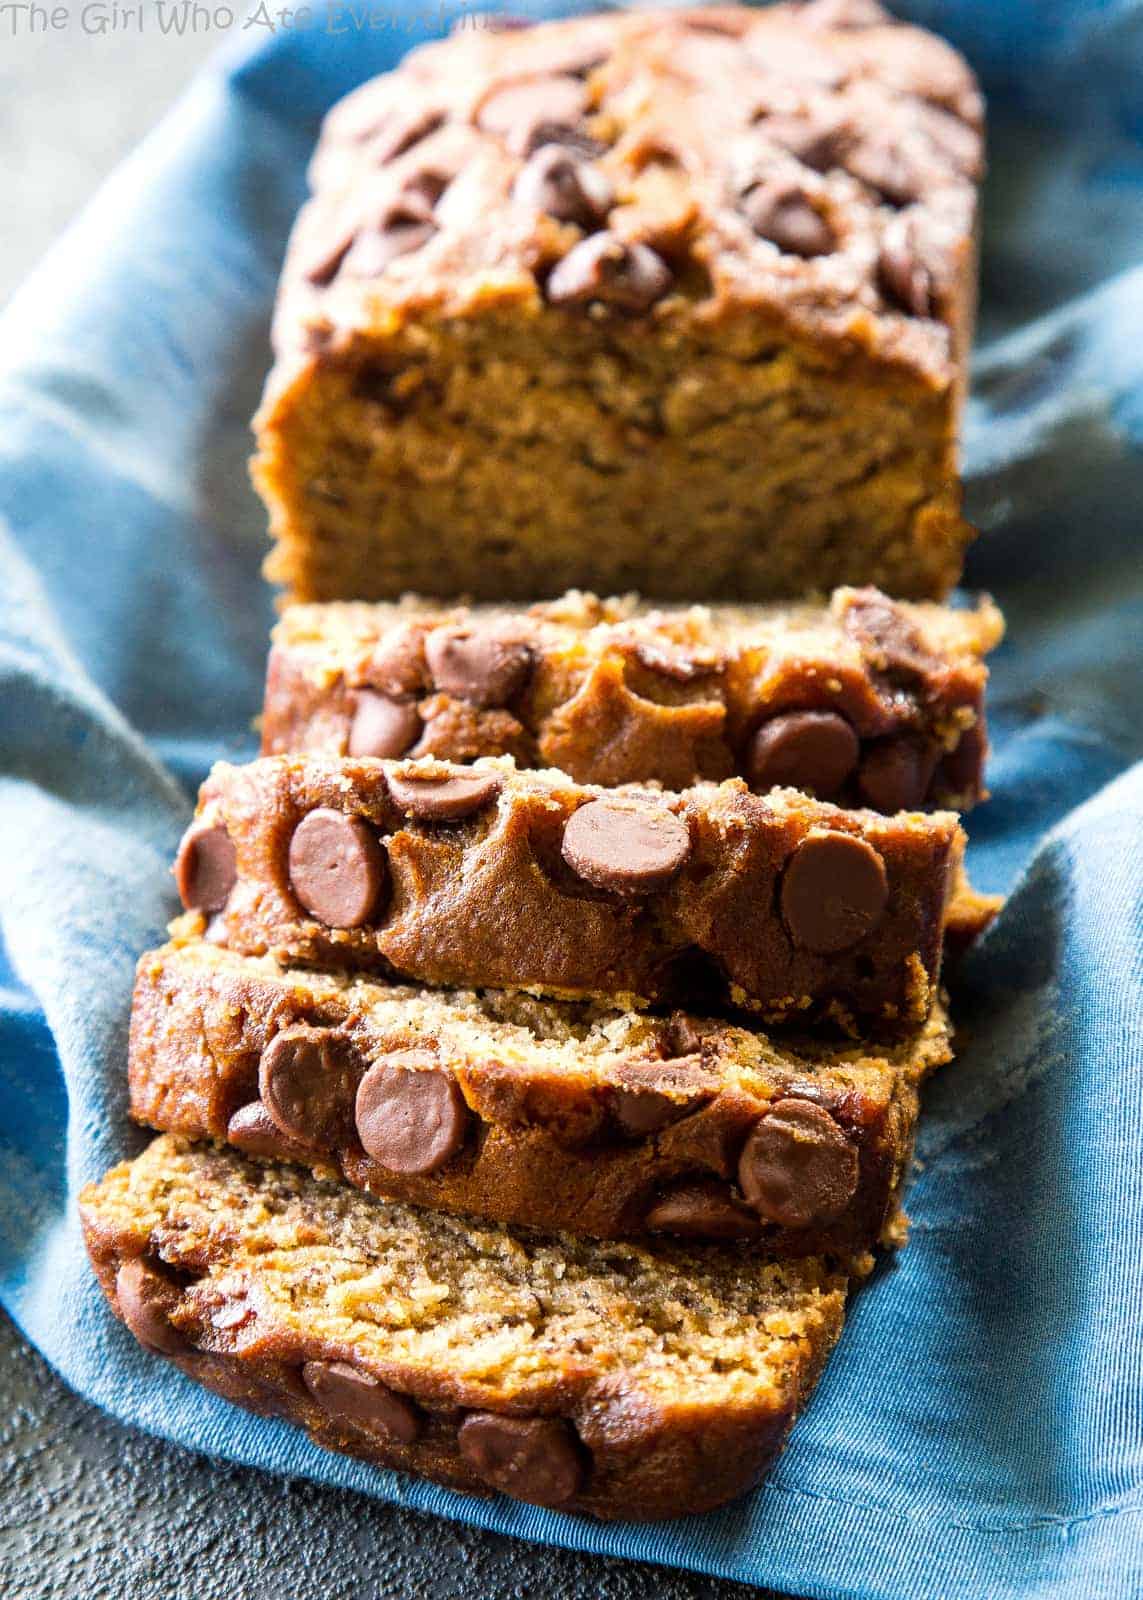 Cake Mix Banana Bread (3 Ingredient Recipe!) - Our Zesty Life